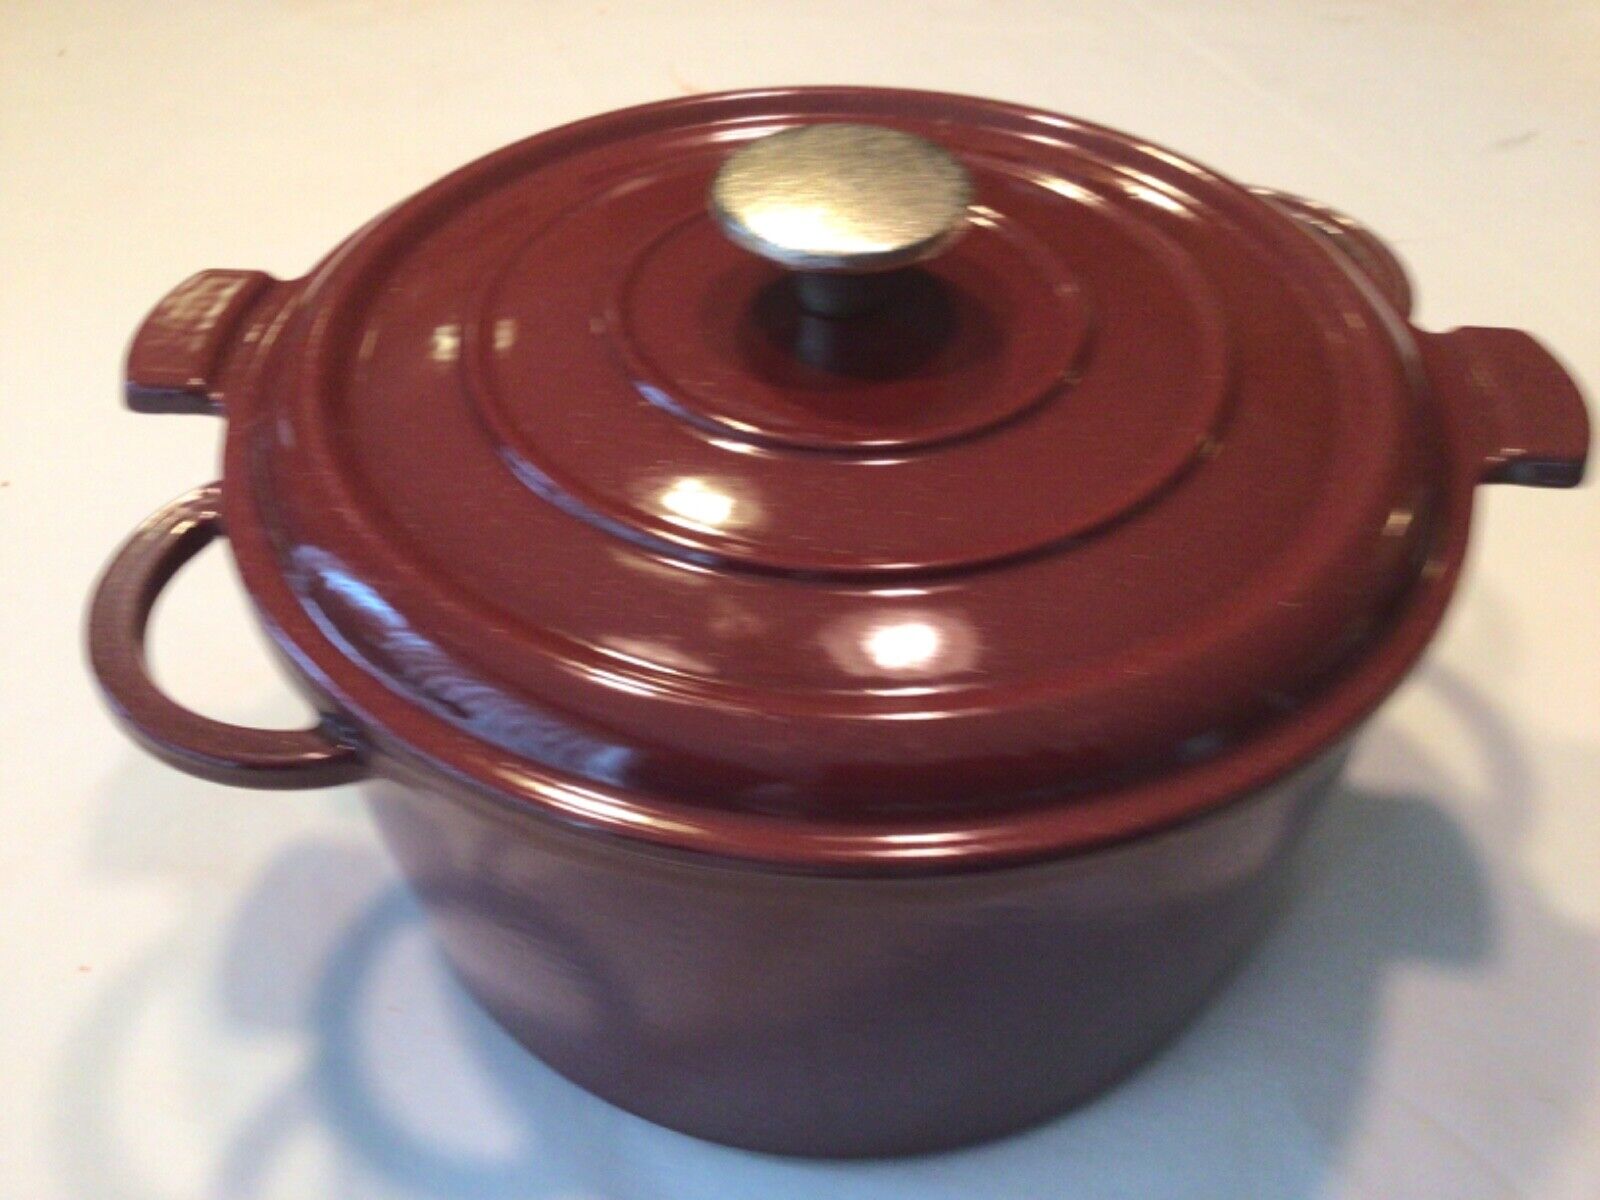 VINTAGE Dutch Oven W/ Lid Burgundy Red Enamel Round Cast Iron 5 Qt French France